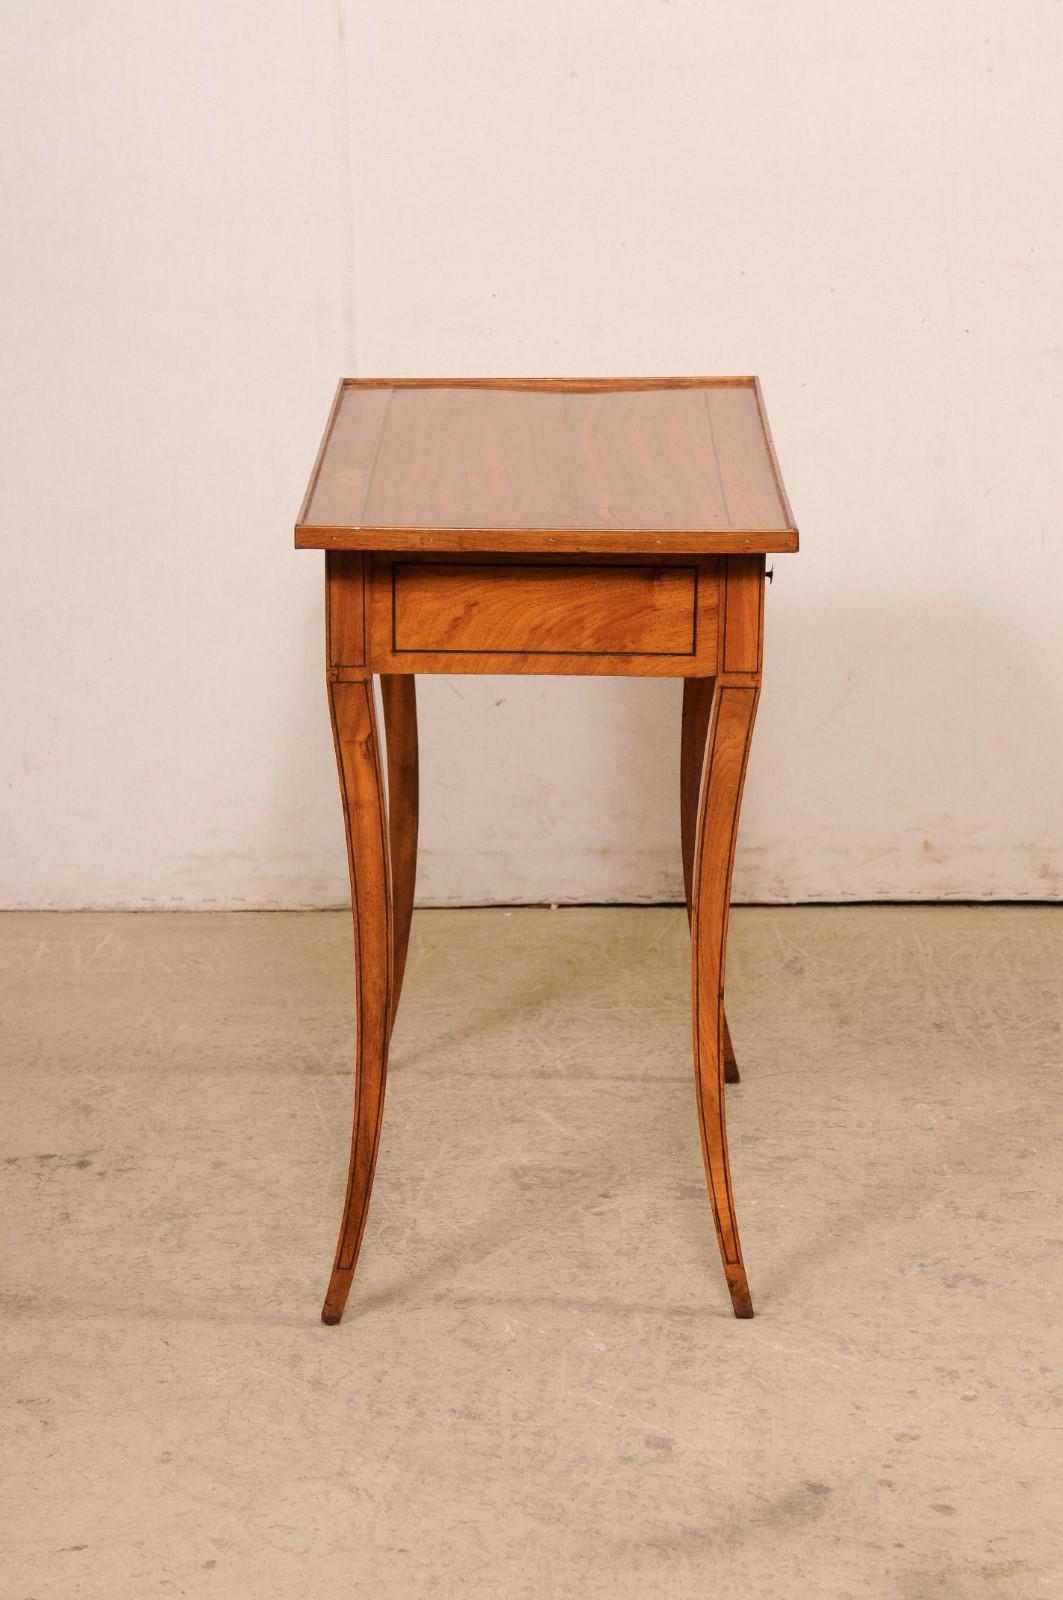 An Early 19th C. Italian Occasional Table w/Inlay Accents & Elegant Sabre Legs For Sale 1